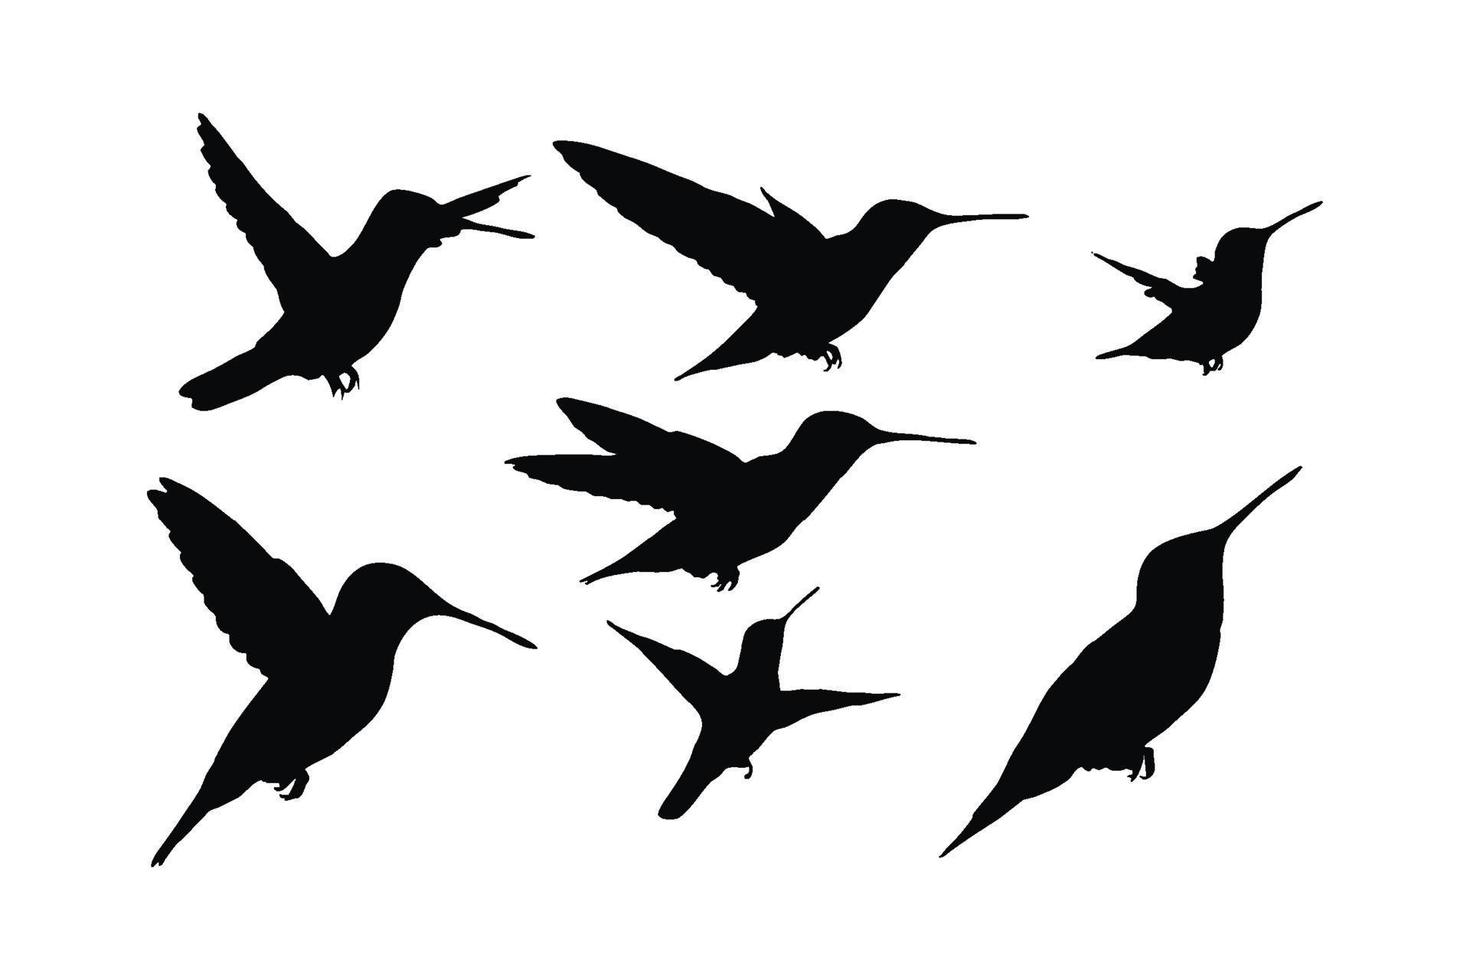 Hummingbird flying silhouette set on a white background. Hummingbirds in different positions flying and sitting silhouette collection. Wildlife bird icons silhouette bundle design. vector